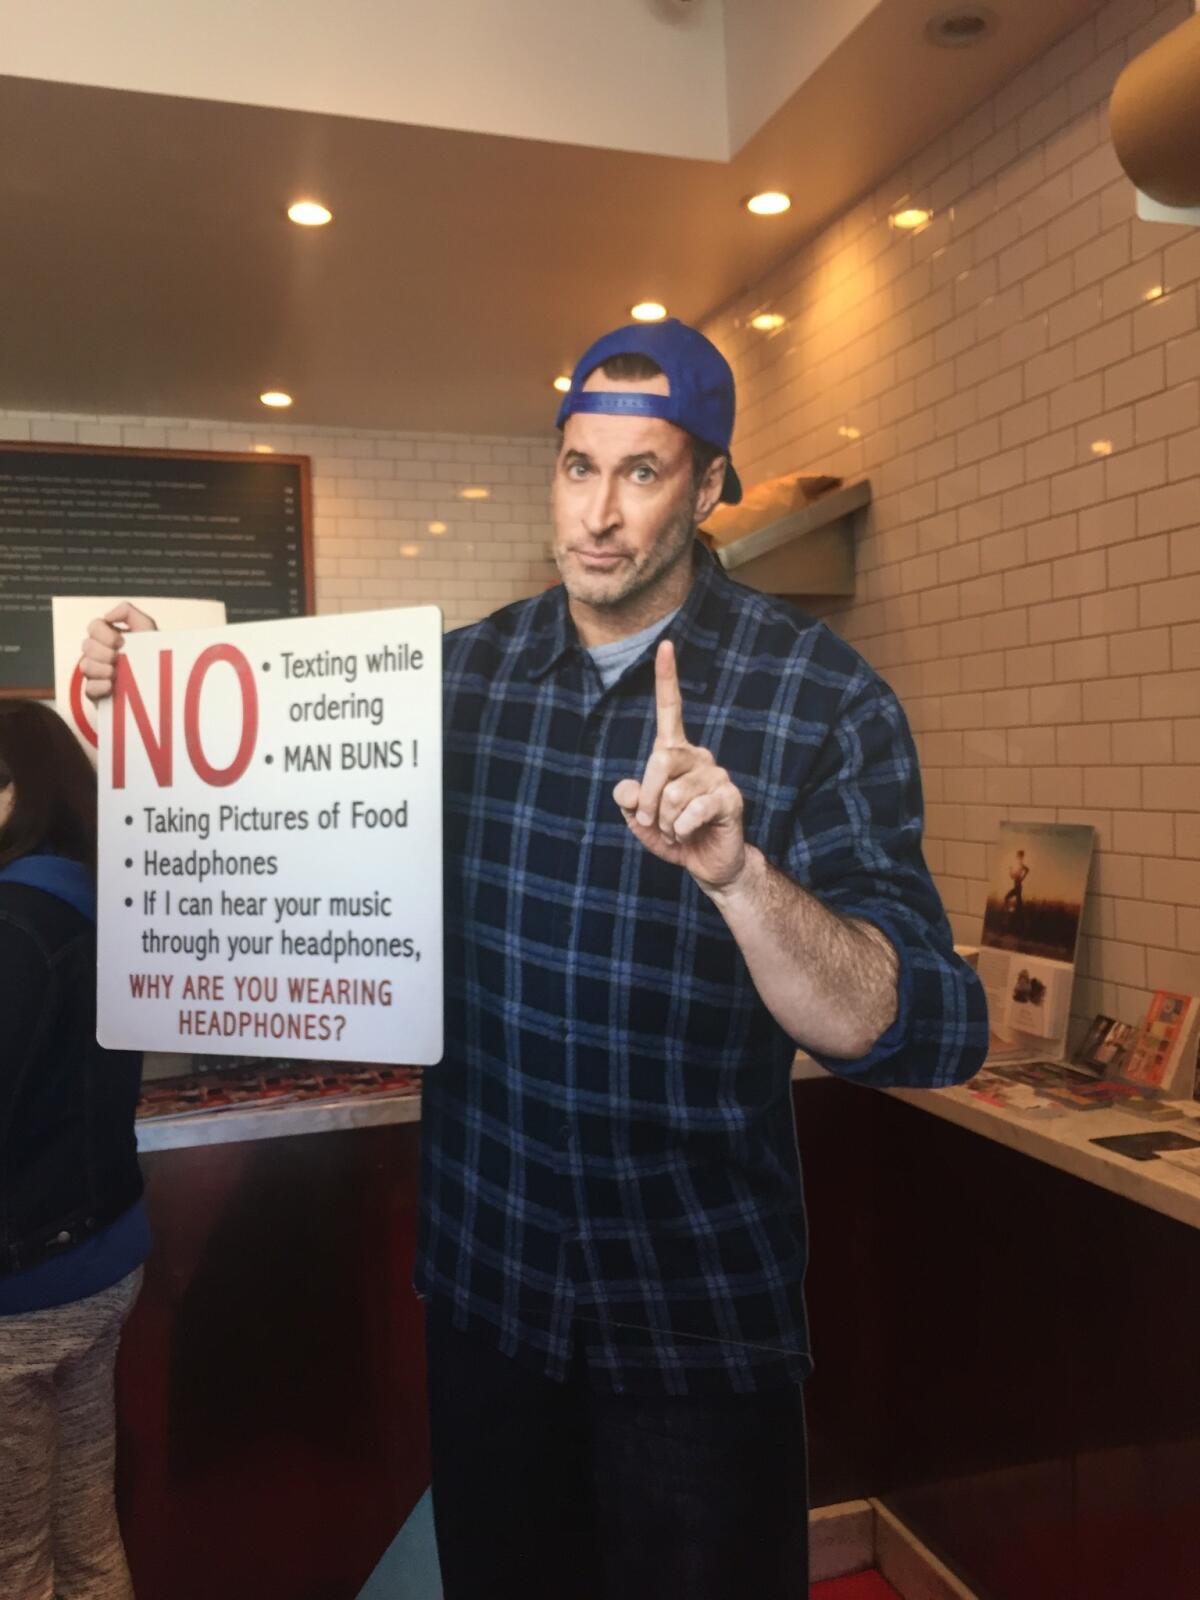 A cardboard cutout of resident grump Luke (Scott Patterson) added to the authenticity of the faux Luke's Diner decor.